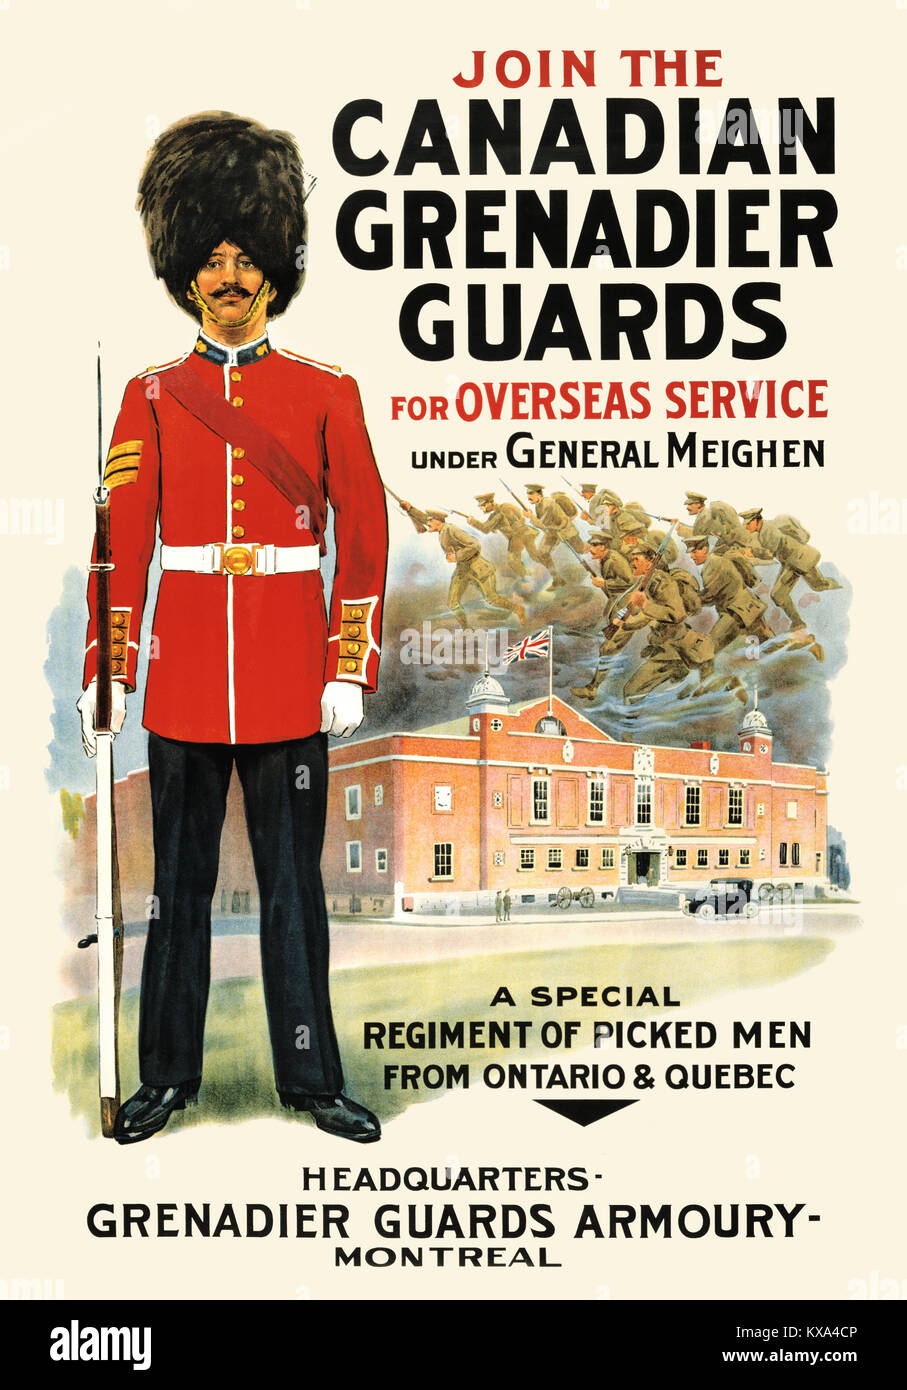 Join the Canadian Grenadier Guards Stock Photo